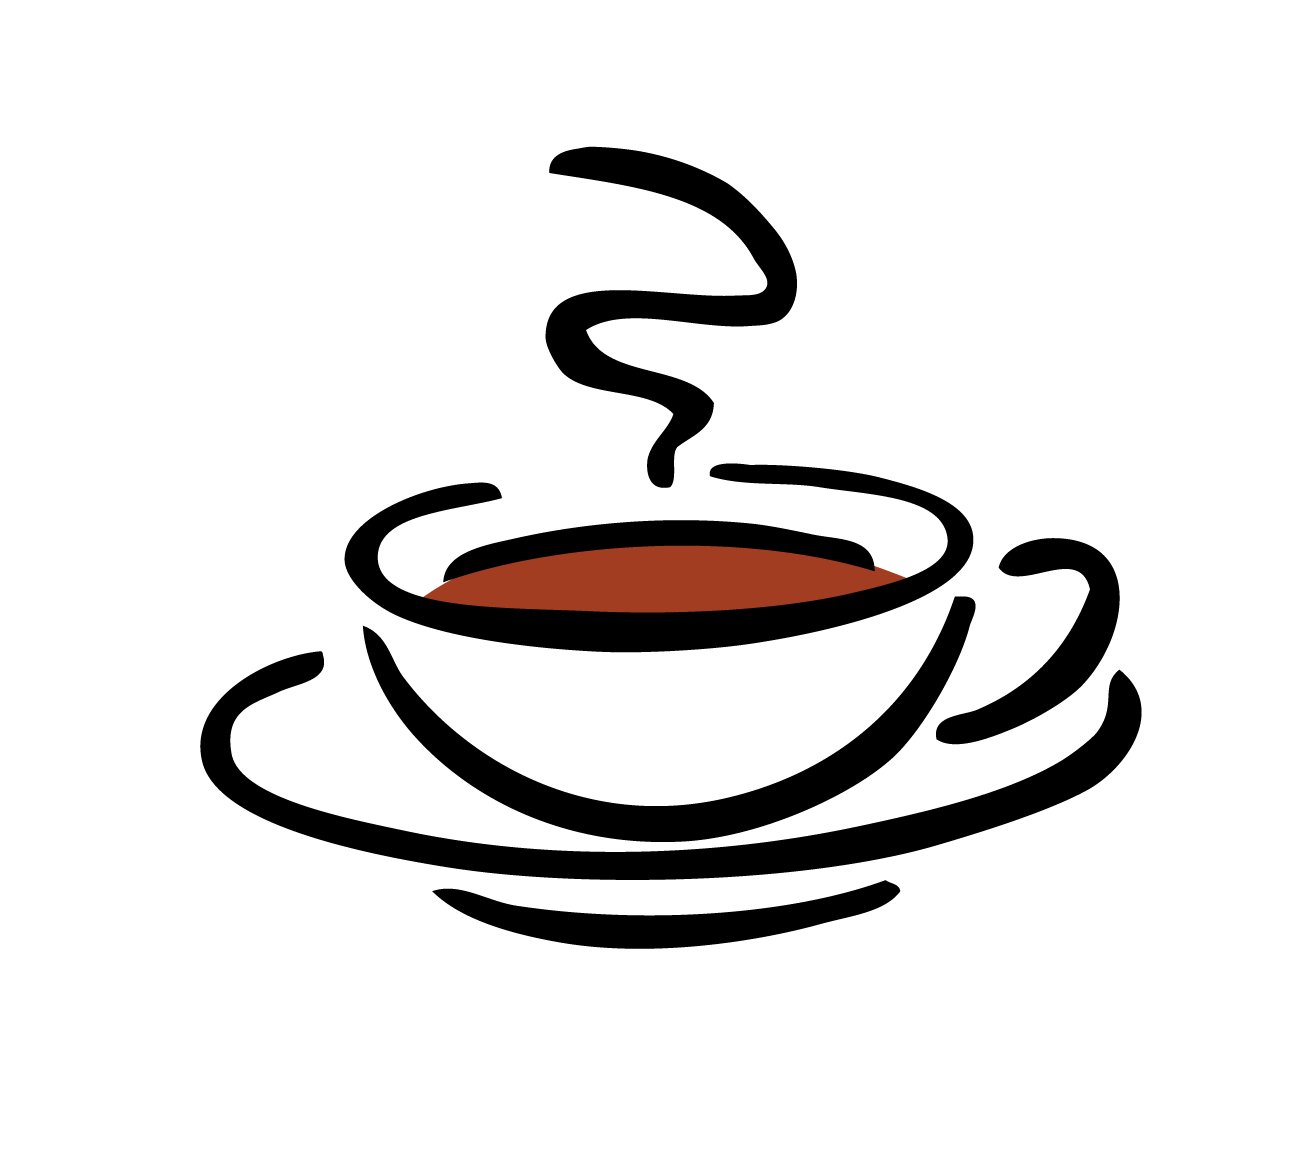 Coffe tips on beans. Clipart coffee coffee bar